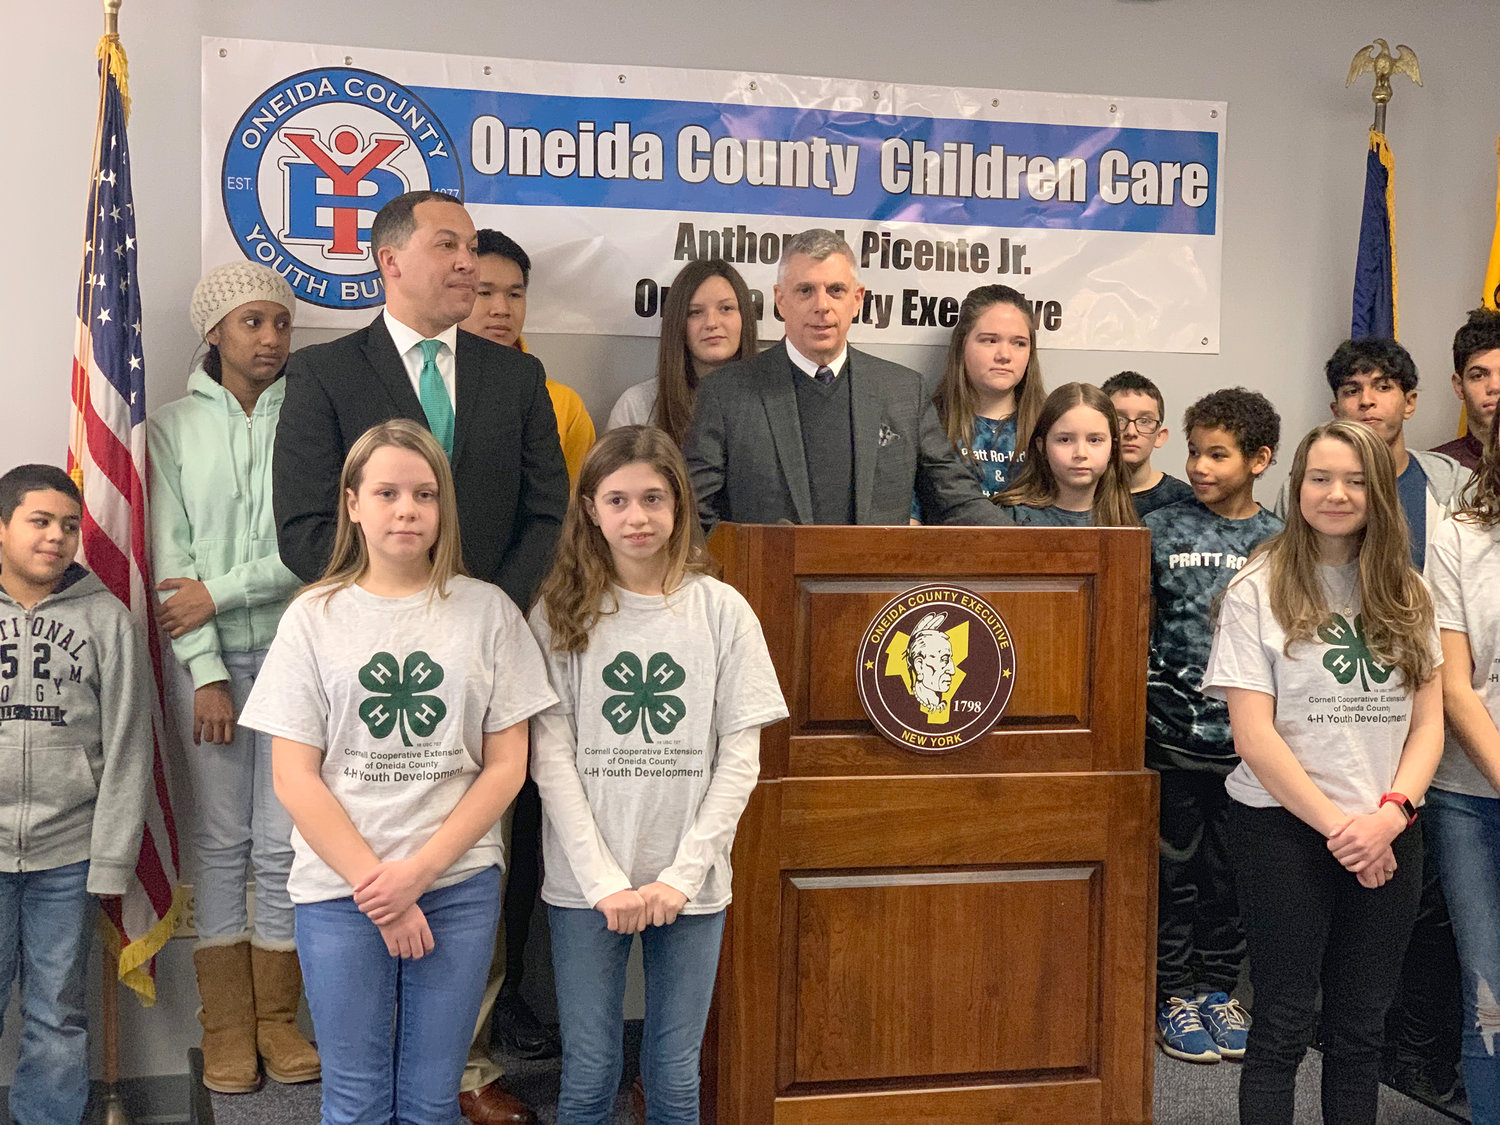 VOLUNTEER EDUCATION — Oneida County Youth Bureau Director Kevin Green and Oneida County Executive Anthony J. Picente Jr., at lectern, pose at the county office building in Utica Wednesday with youth volunteers during a commemoration of 10 years of Oneida County Children Care, an initiative to link youth volunteers with service agencies in need of volunteers.